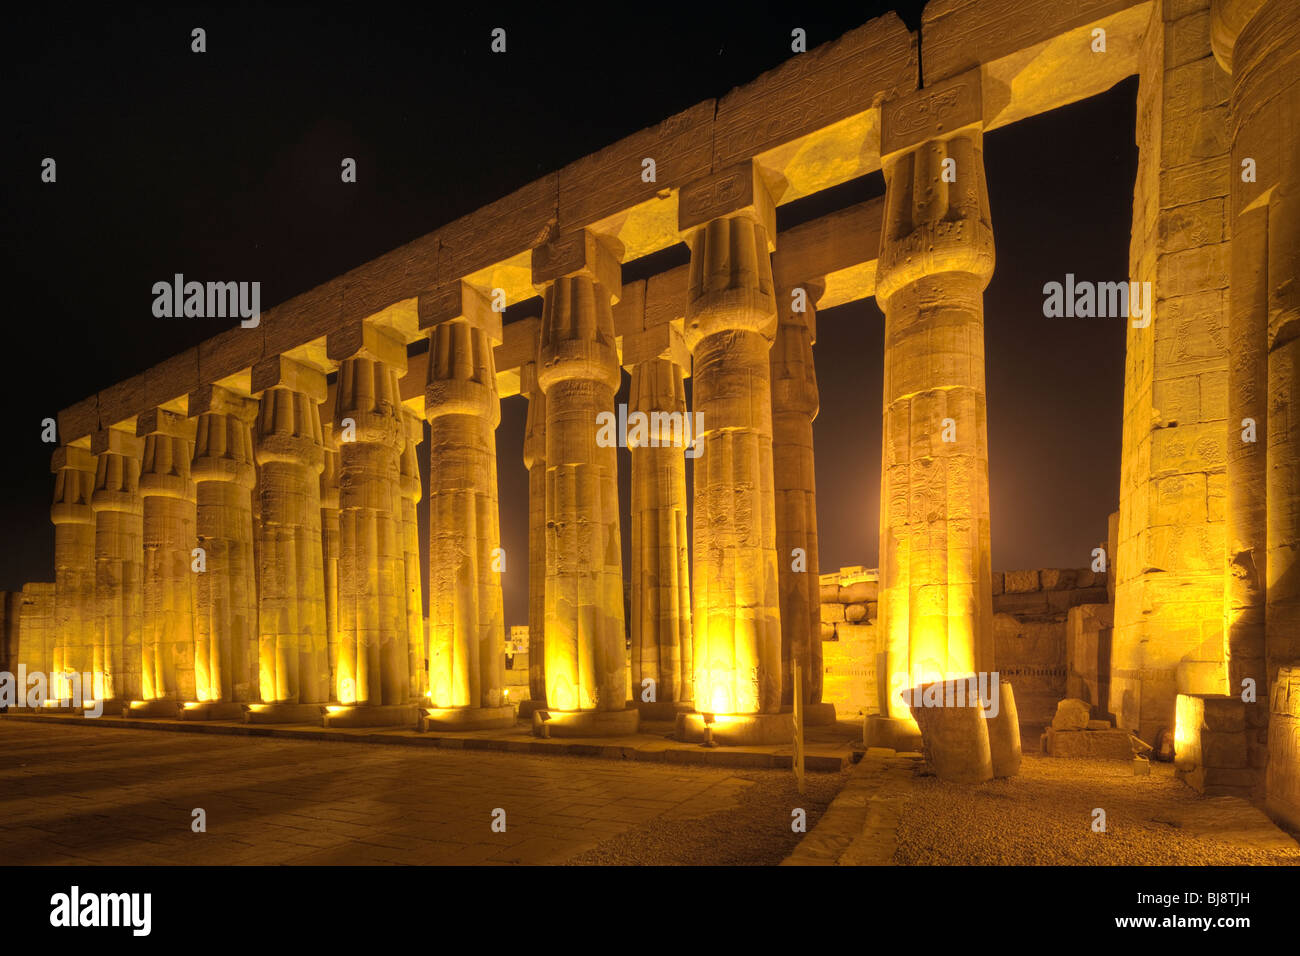 detail of columns of Court of Amenhotep, Luxor Temple, Egypt Stock Photo